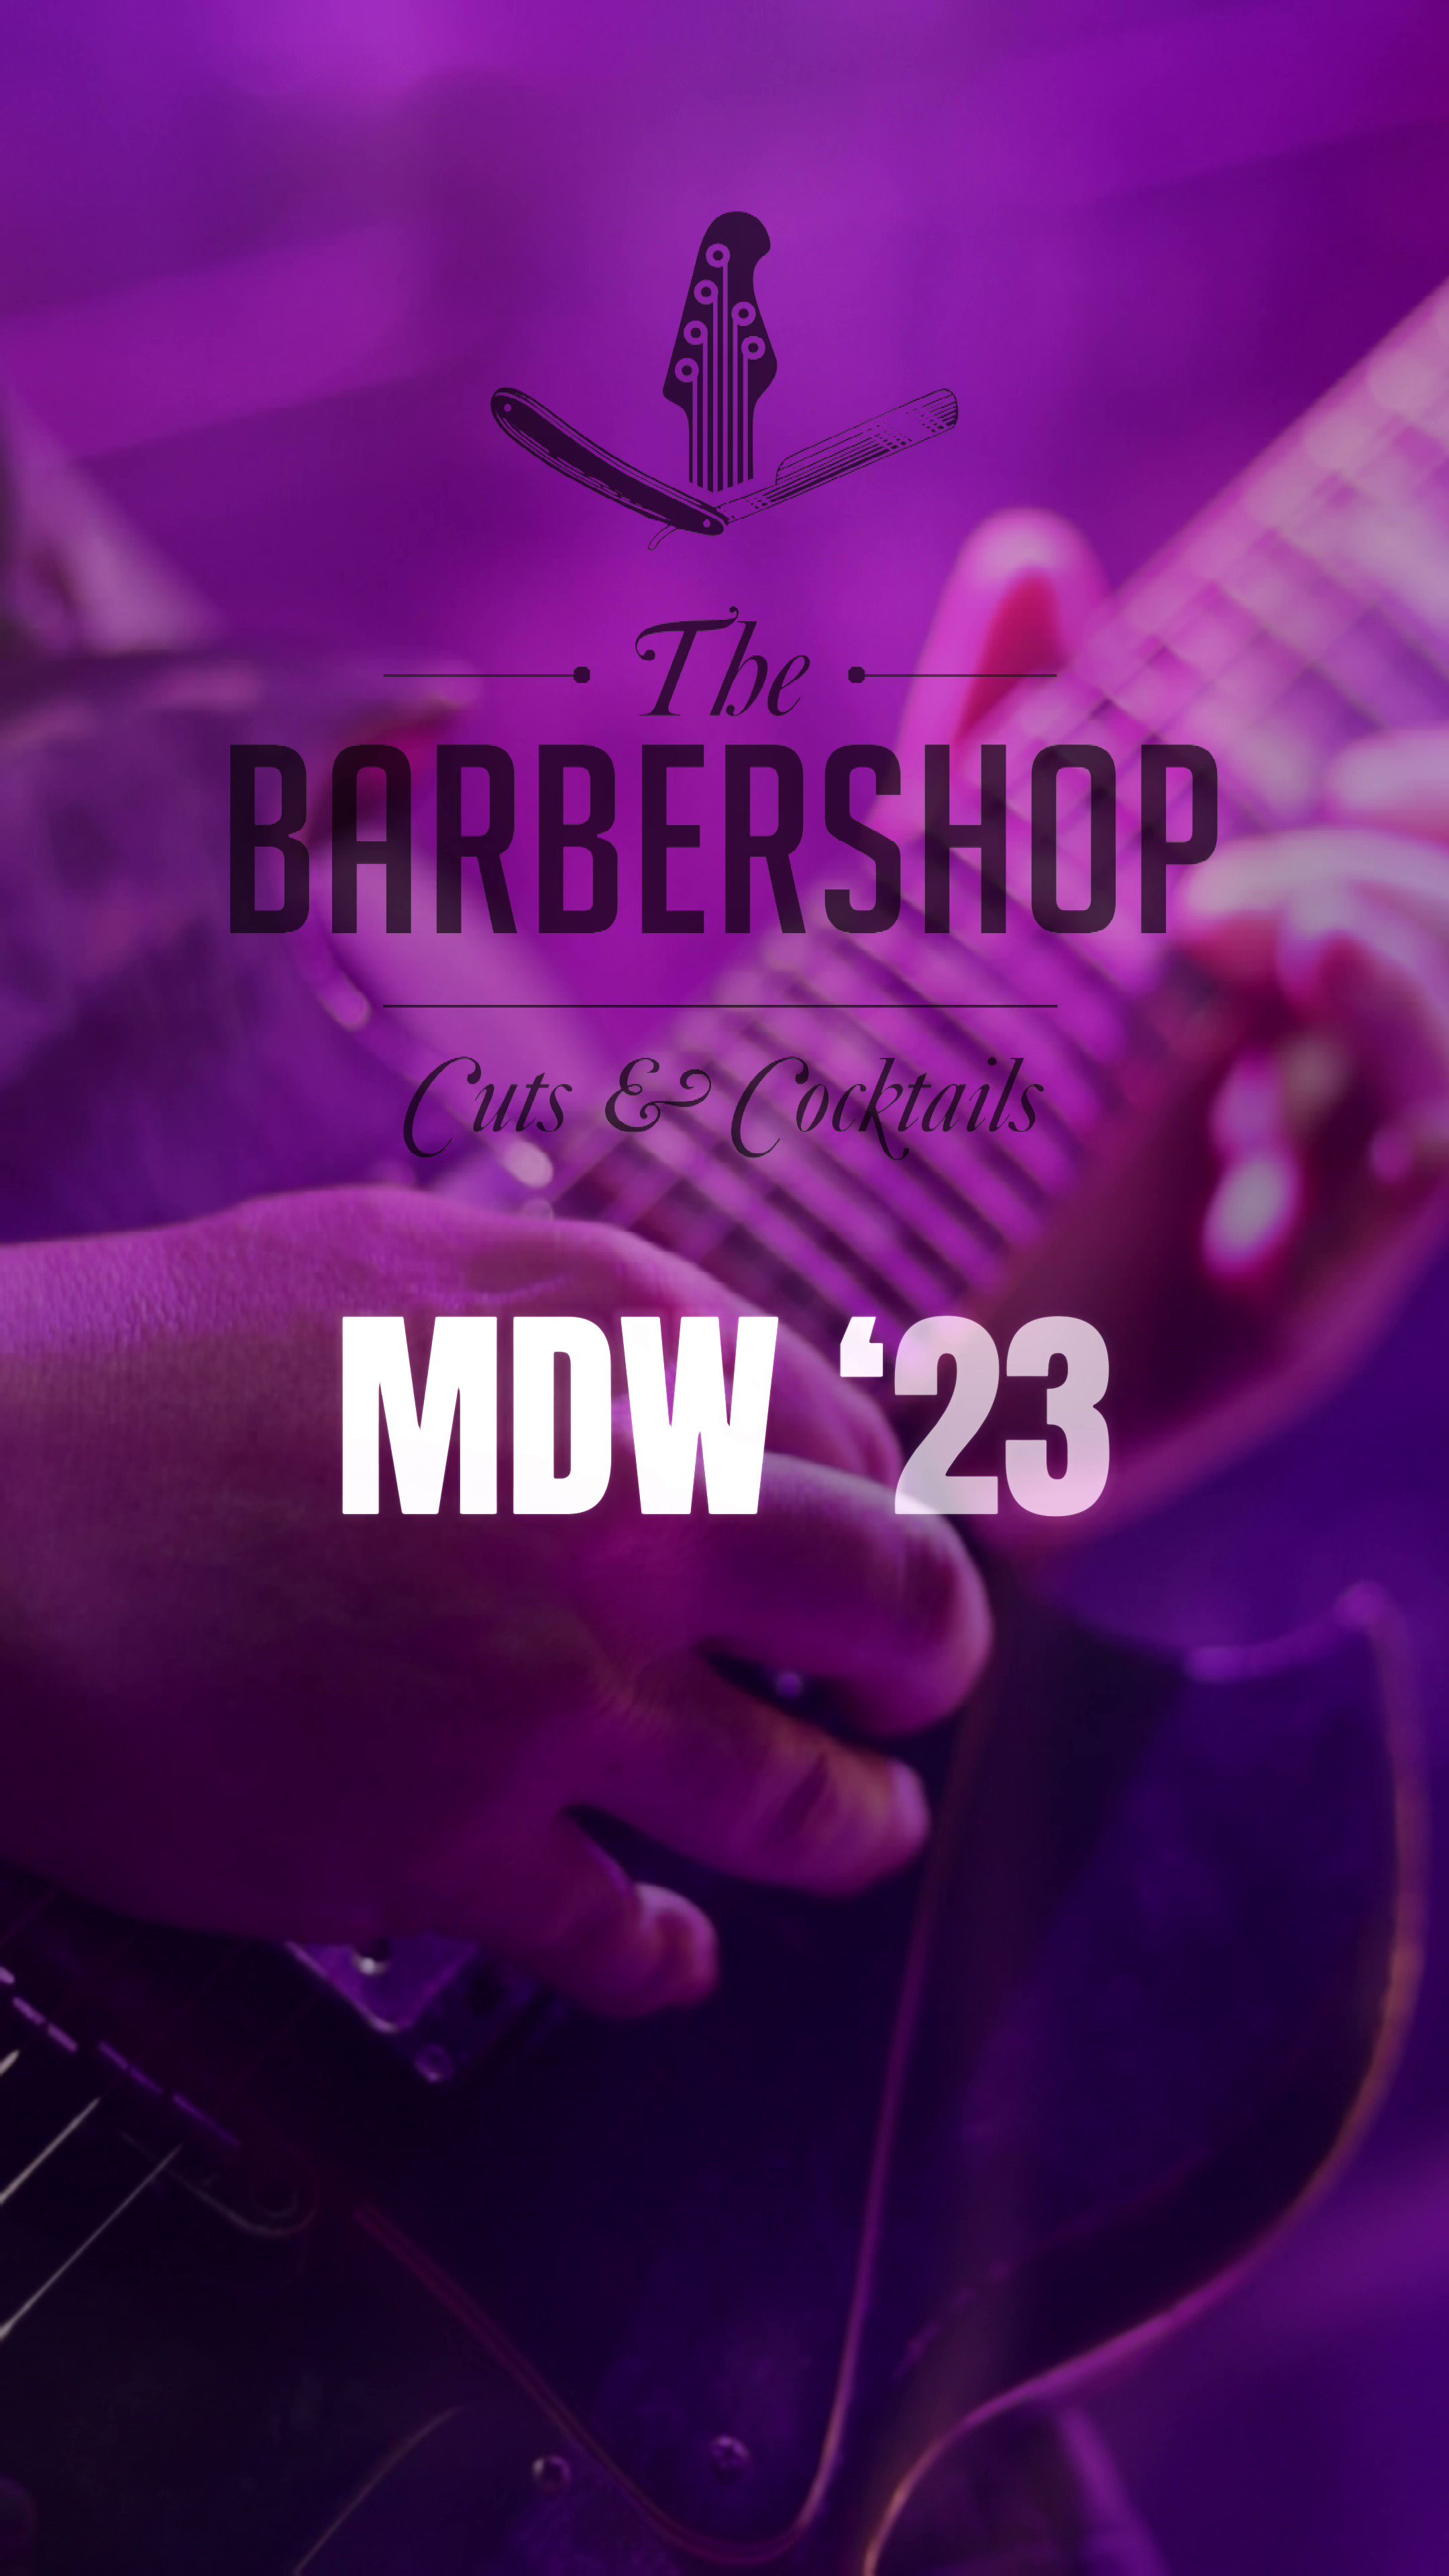 The Barbershop Cuts & Cocktails